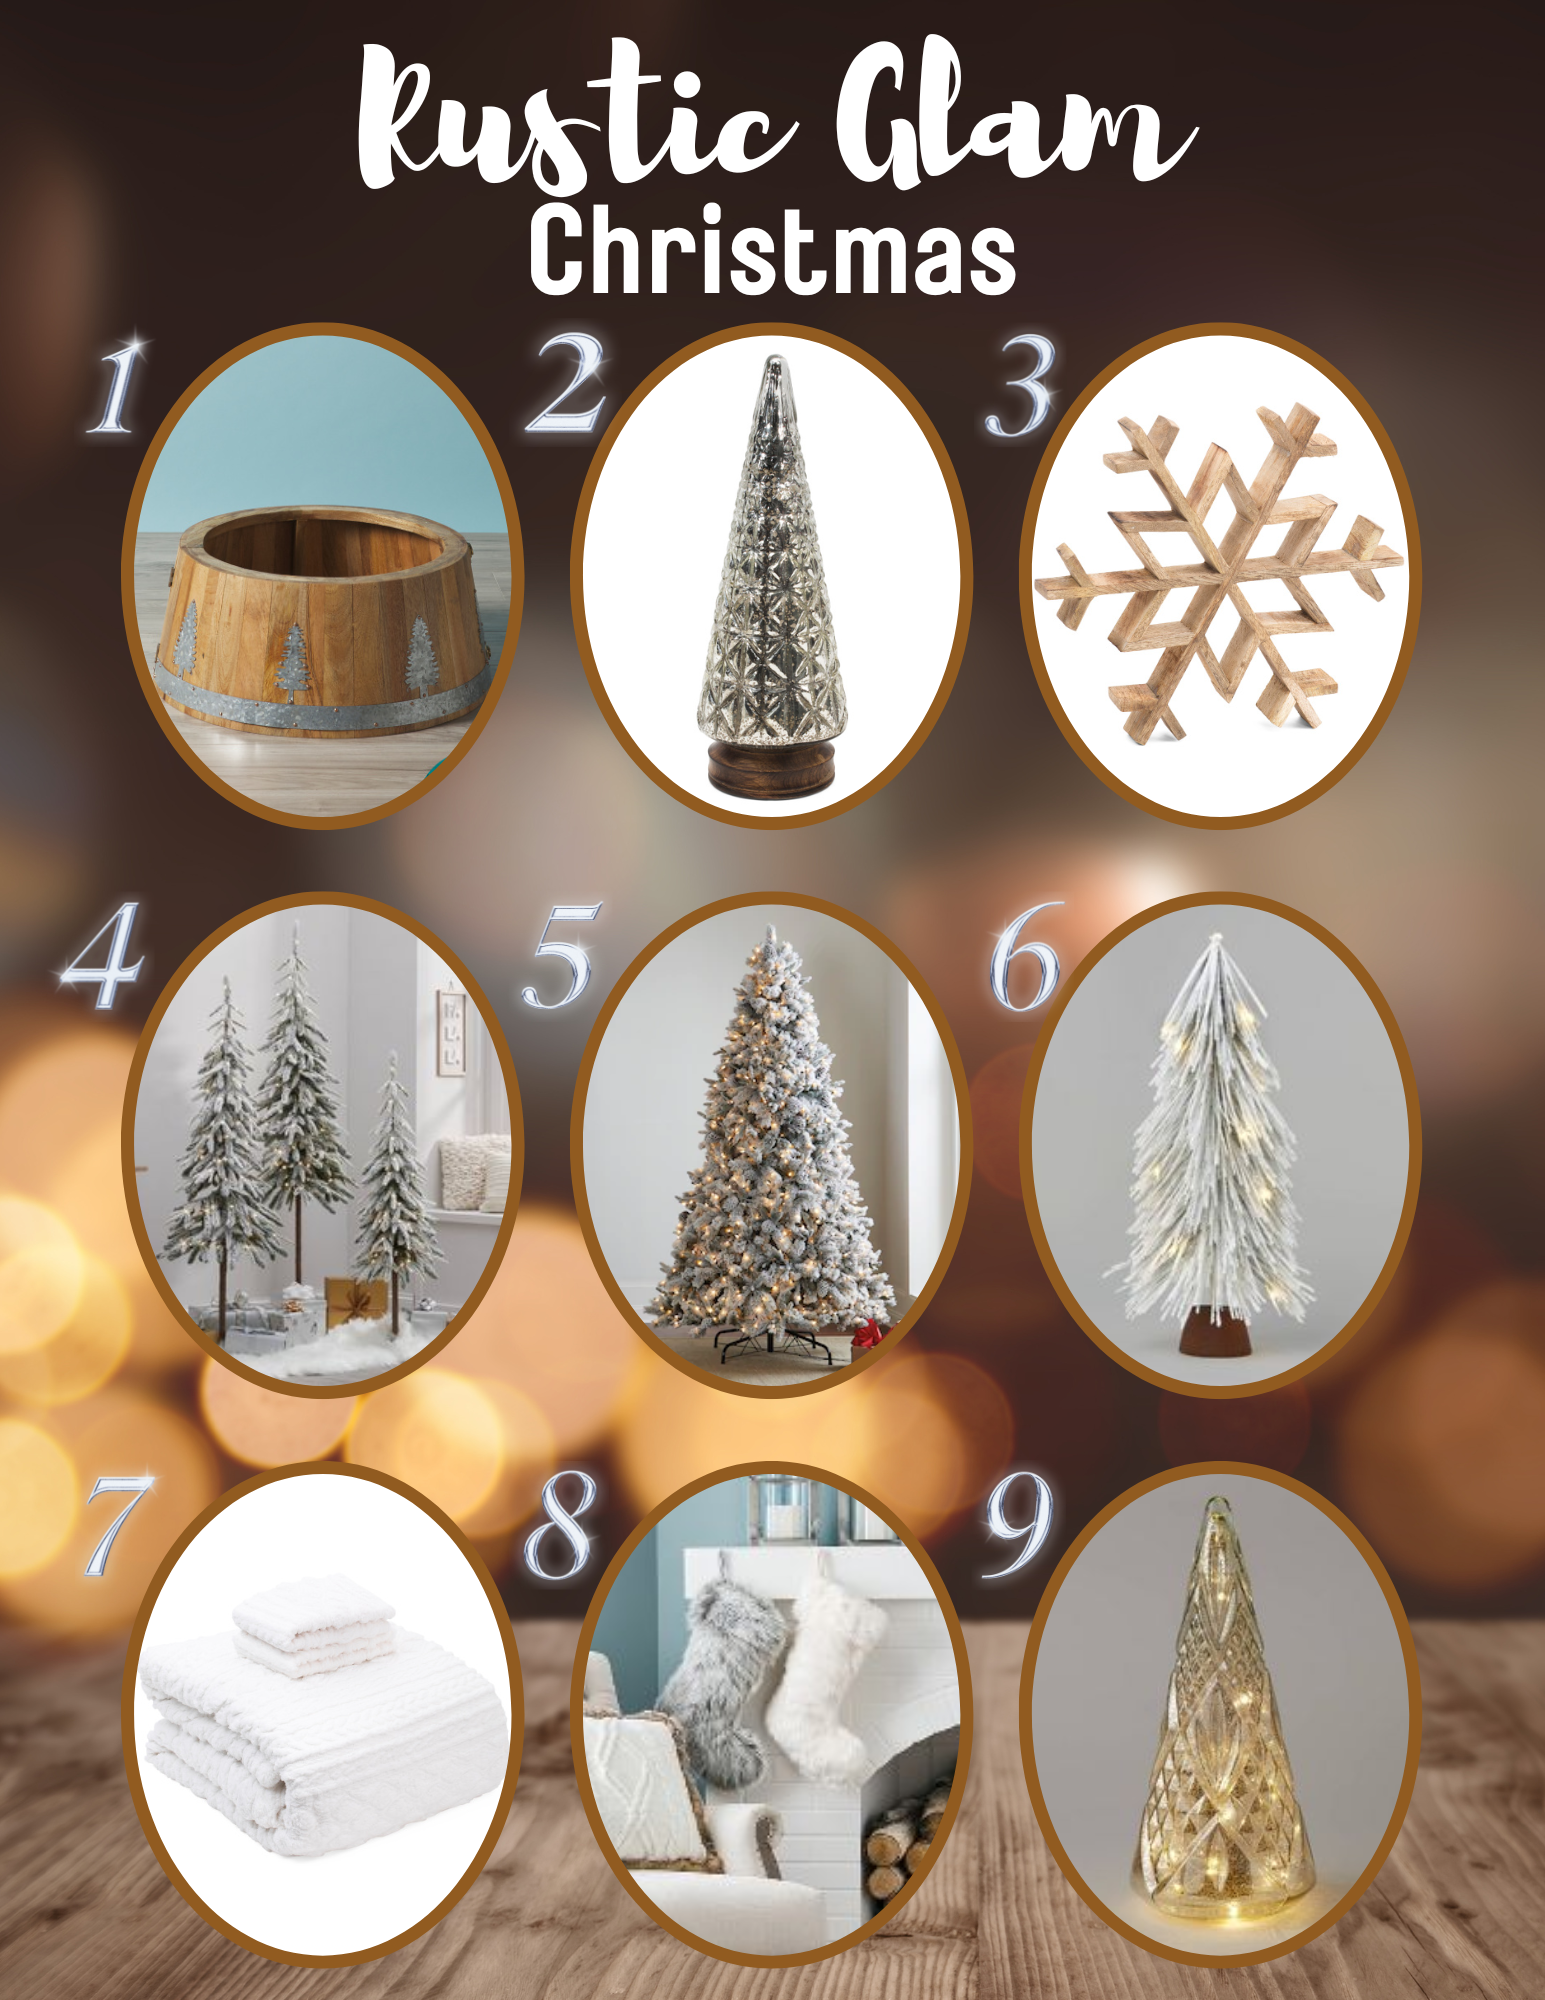 Rustic Glam Christmas by Windermere Mill Creek